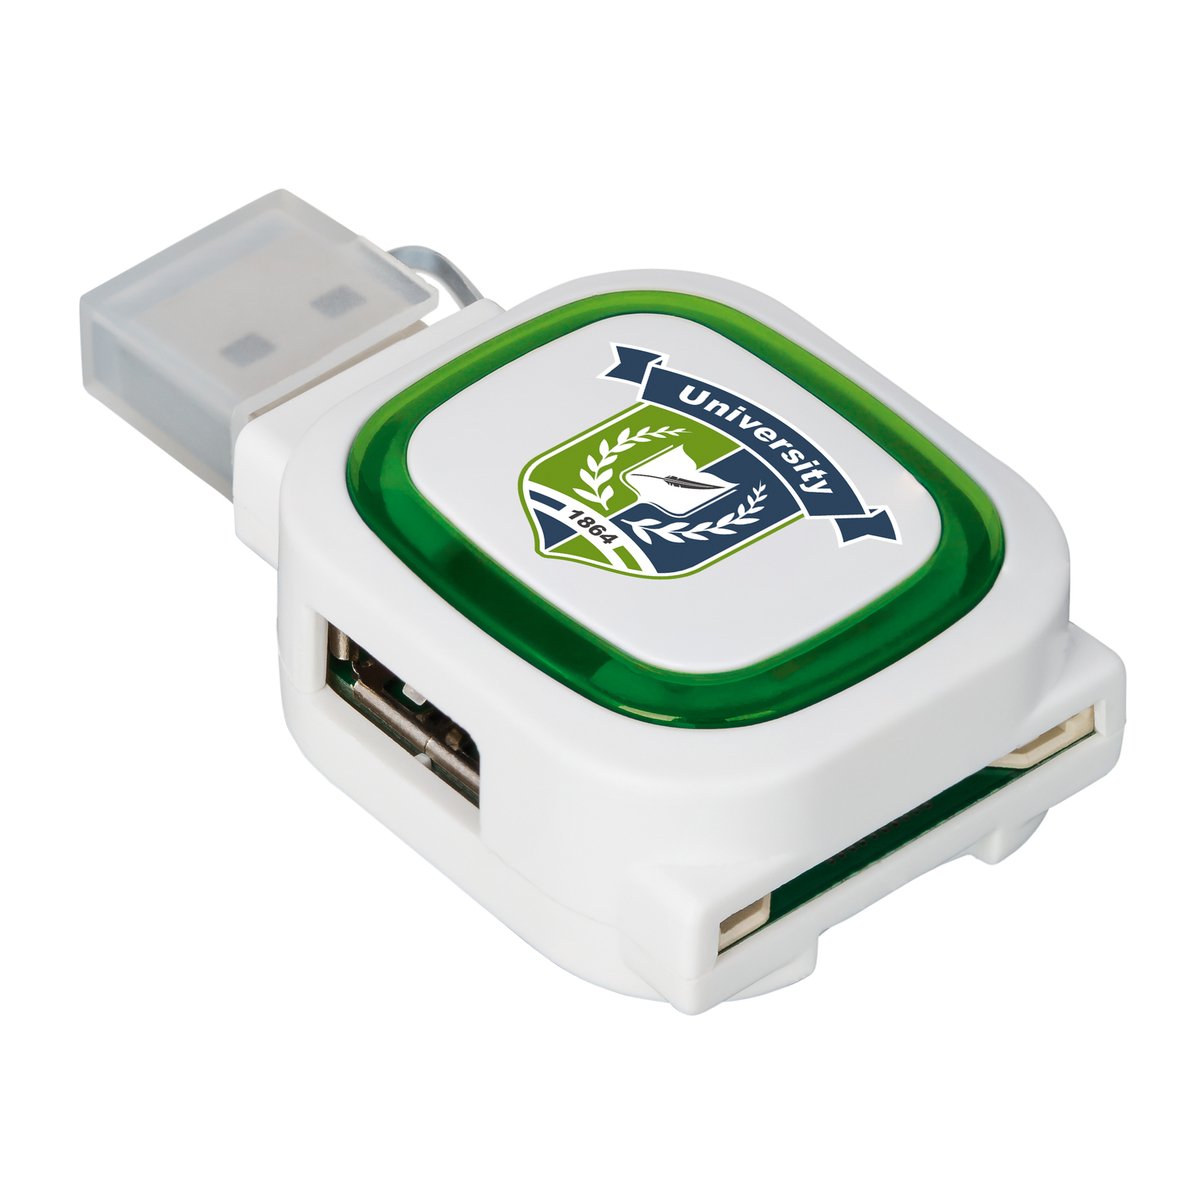 2-port USB hub and card reader COLLECTION 500 green